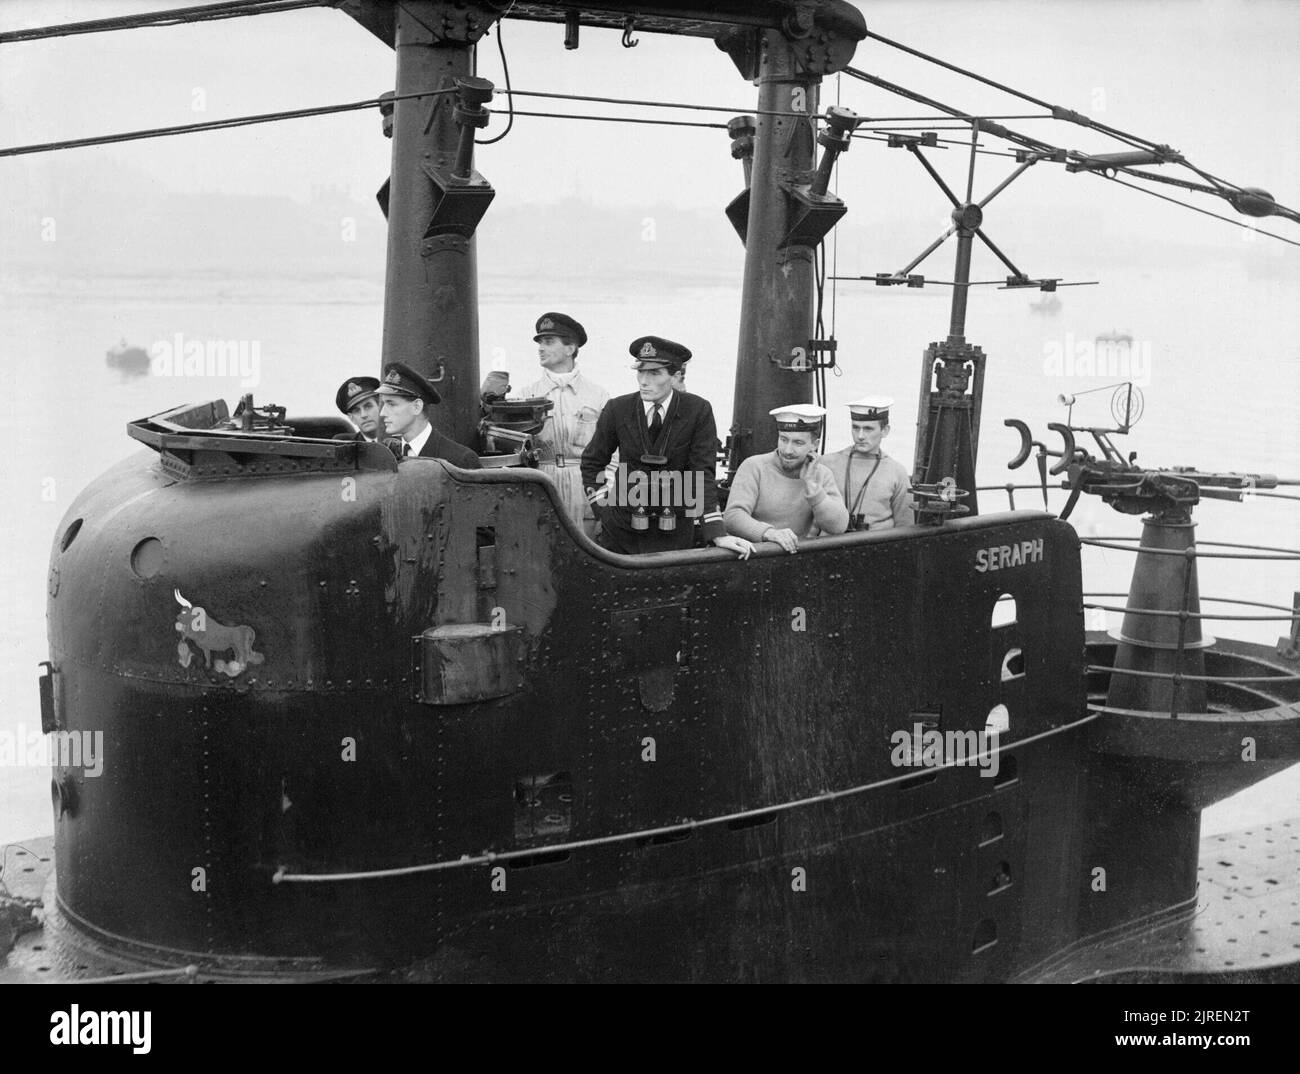 The Royal Navy during the Second World War HMS SERAPH arriving home at Portsmouth after 13 busy months. On the bridge, left to right: Lieutenant F G Harris, RNVR, of Sale, Cheshire; Lieutenant N L A Jewell, of Pinner, Middlesex, the Commanding Officer Warrant Engineer M M Stevenson, DSC, RN, of Glasgow, Scotland, the Engineer Officer; and Lieutenant W D Scott, RN, the First Lieutenant. Note the 20mm anti aircraft gun aft of the conning tower. Stock Photo